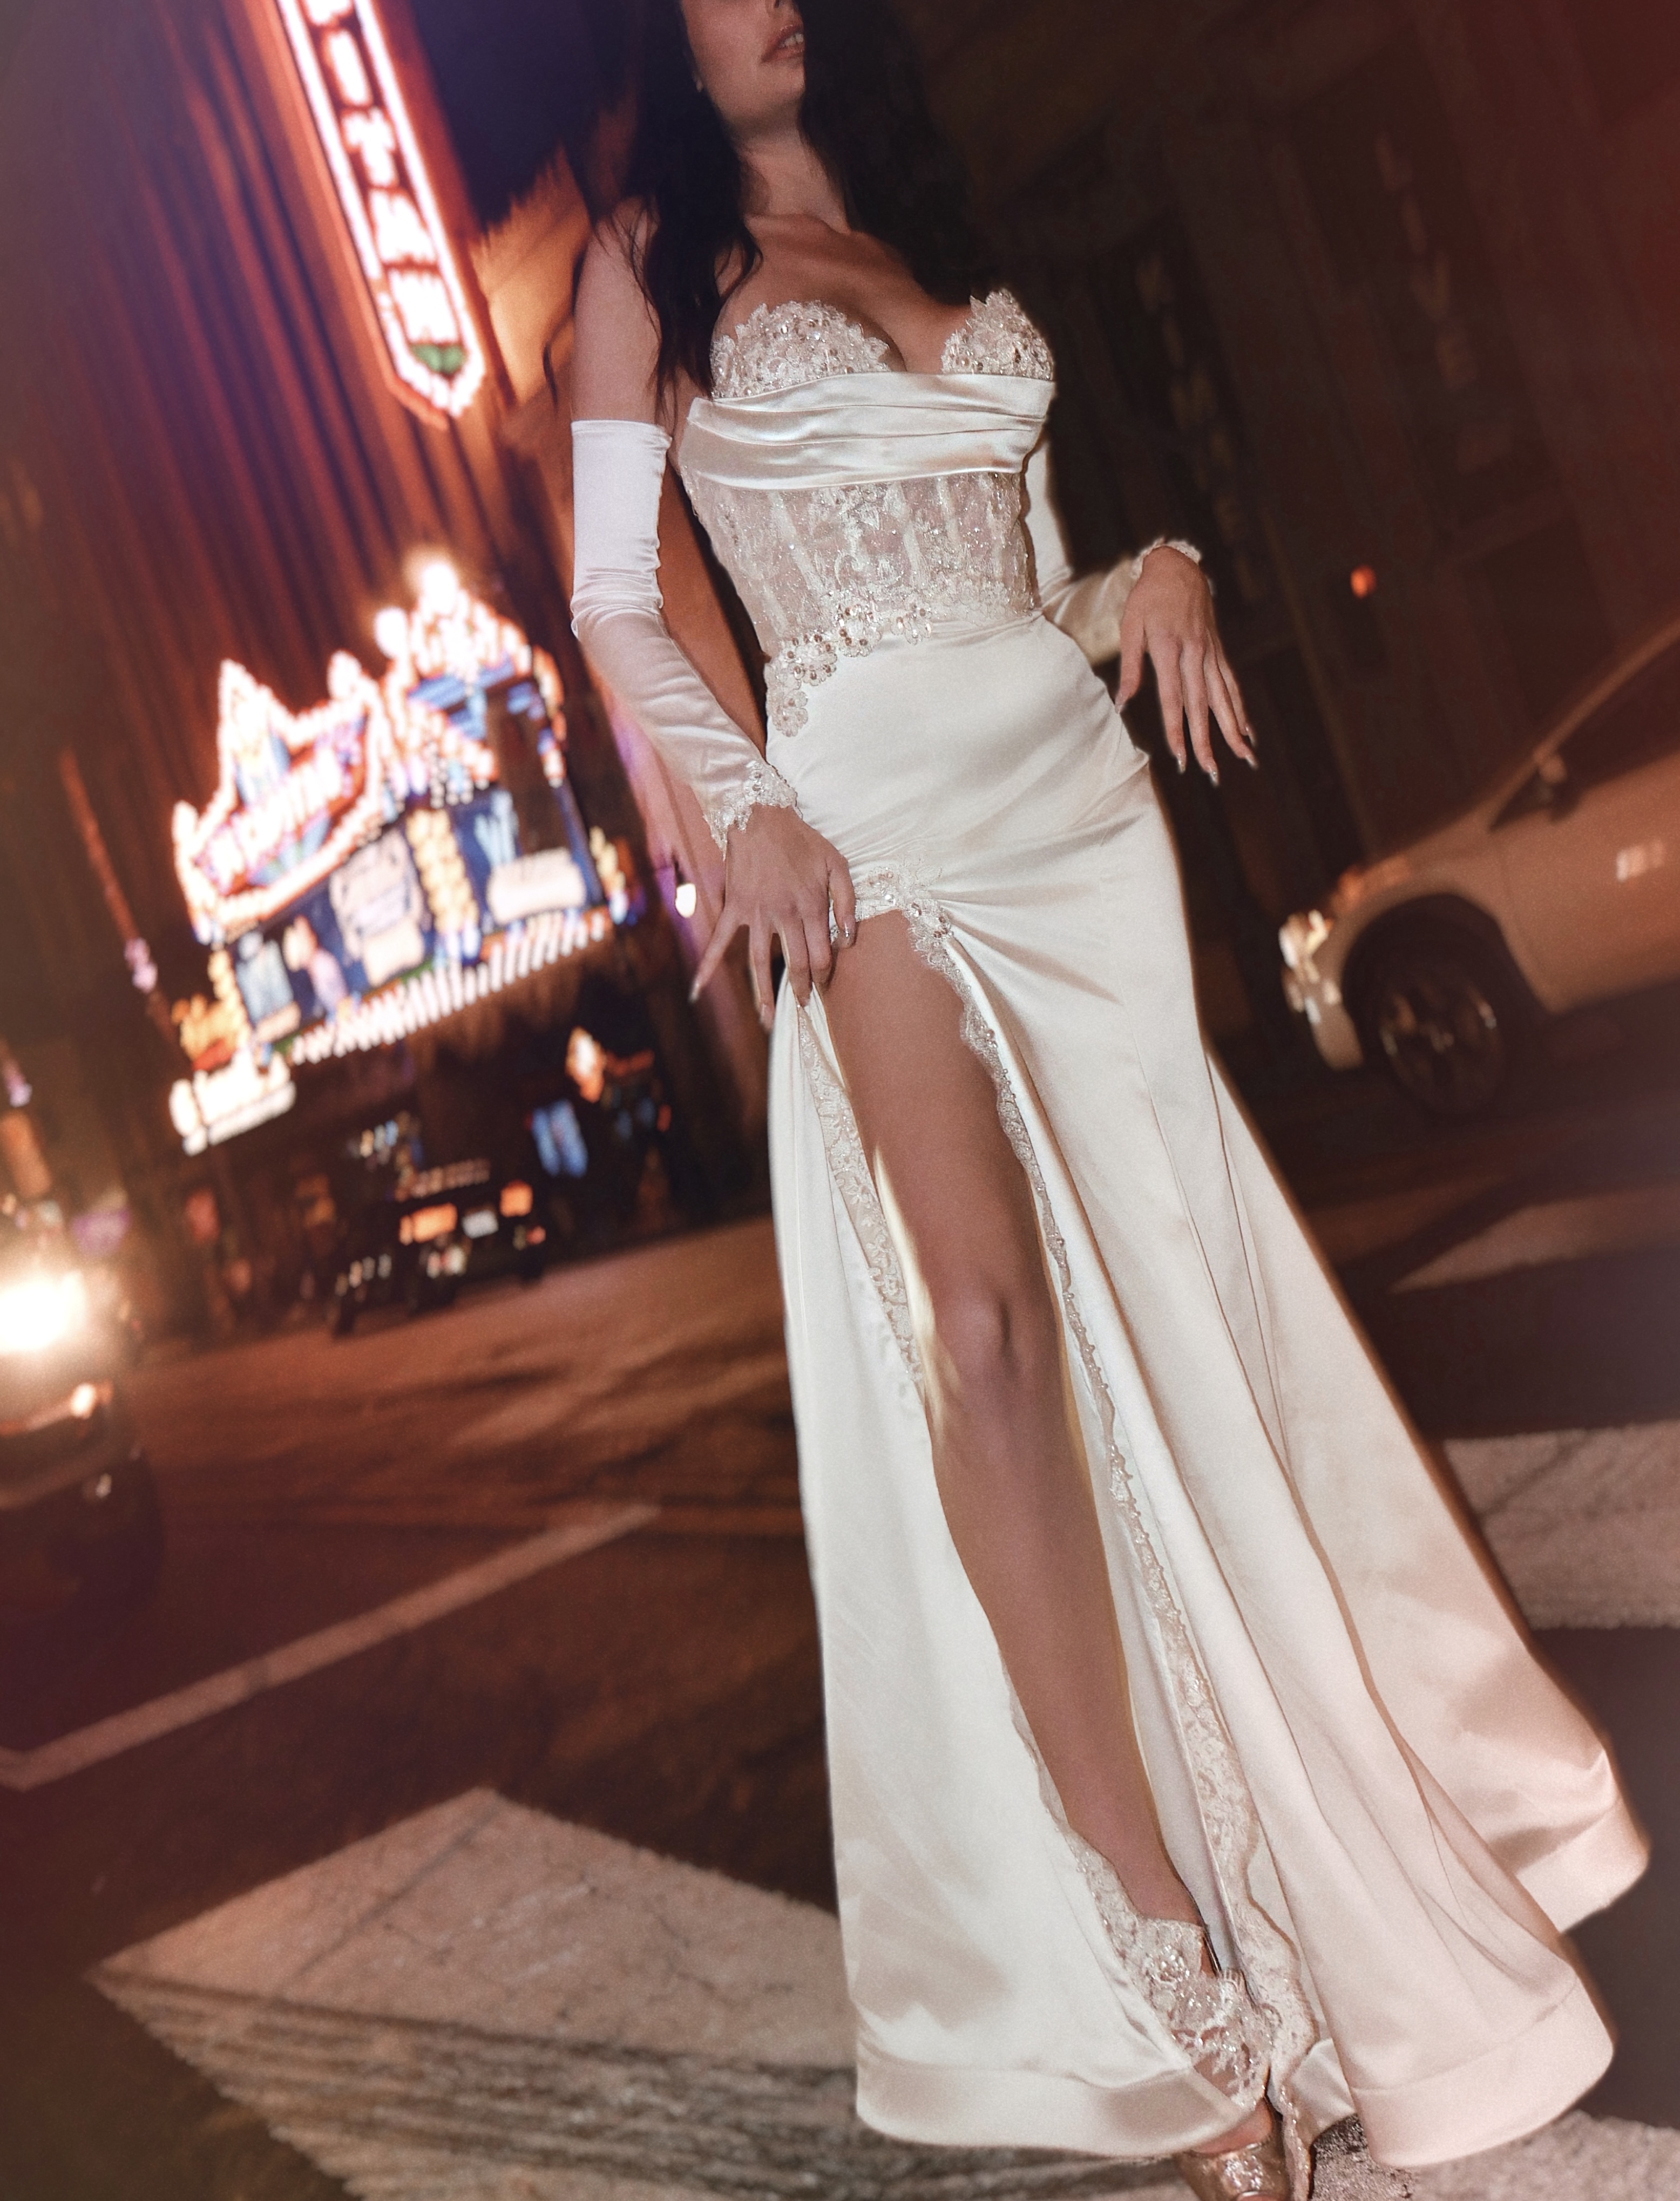 Satin Trumpet Wedding Dress with slit worn by a model on Hollywood blvd.